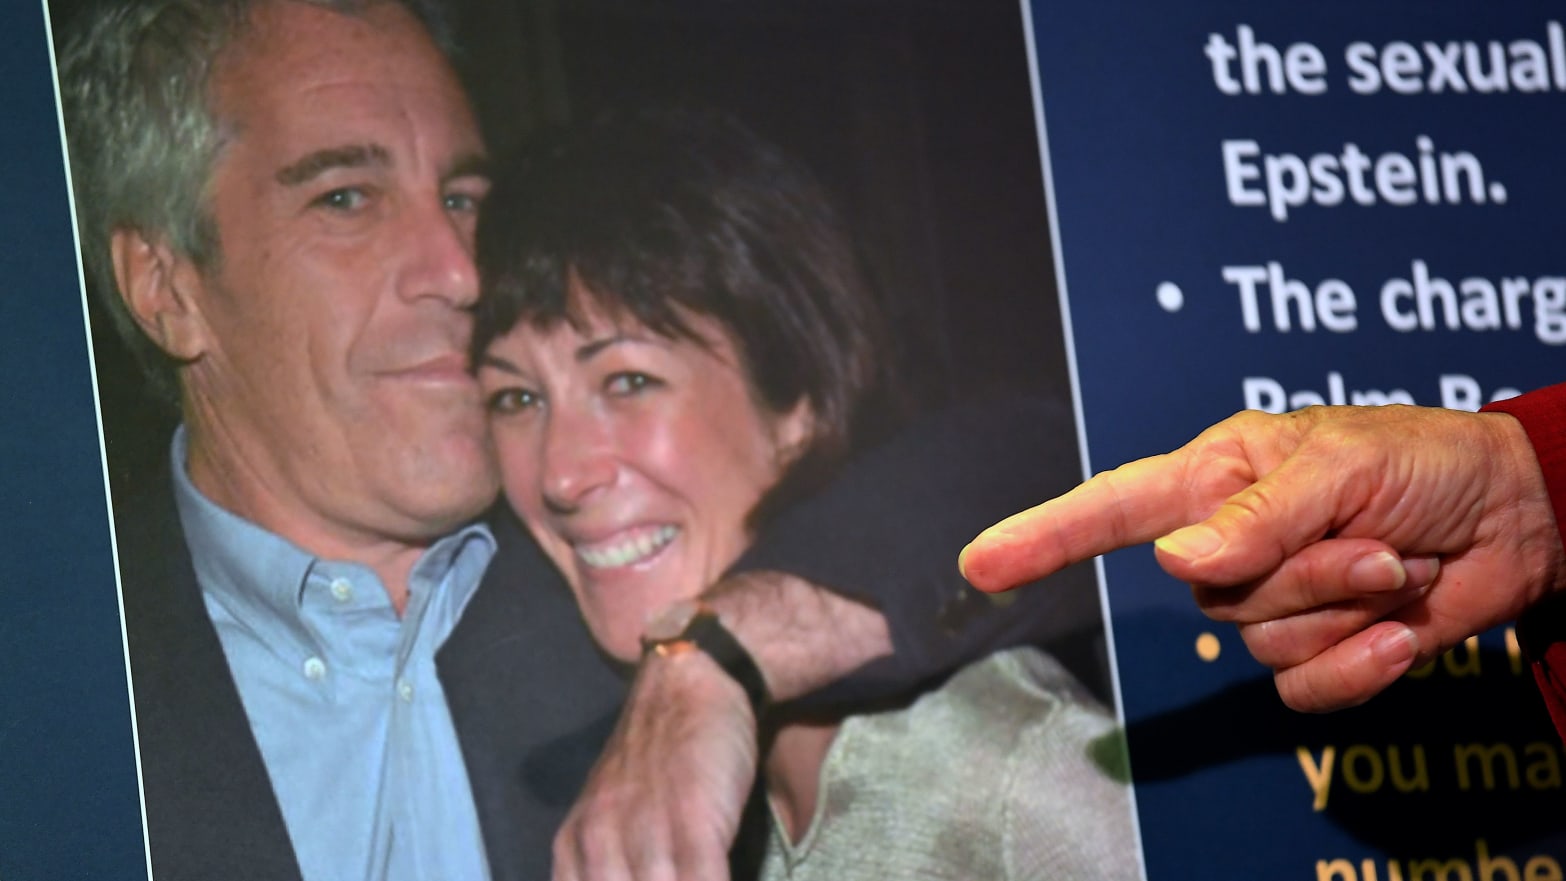 Jeffrey Epstein and Ghislaine Maxwell Forced Young Girls Into an Orgy, Court Records photo